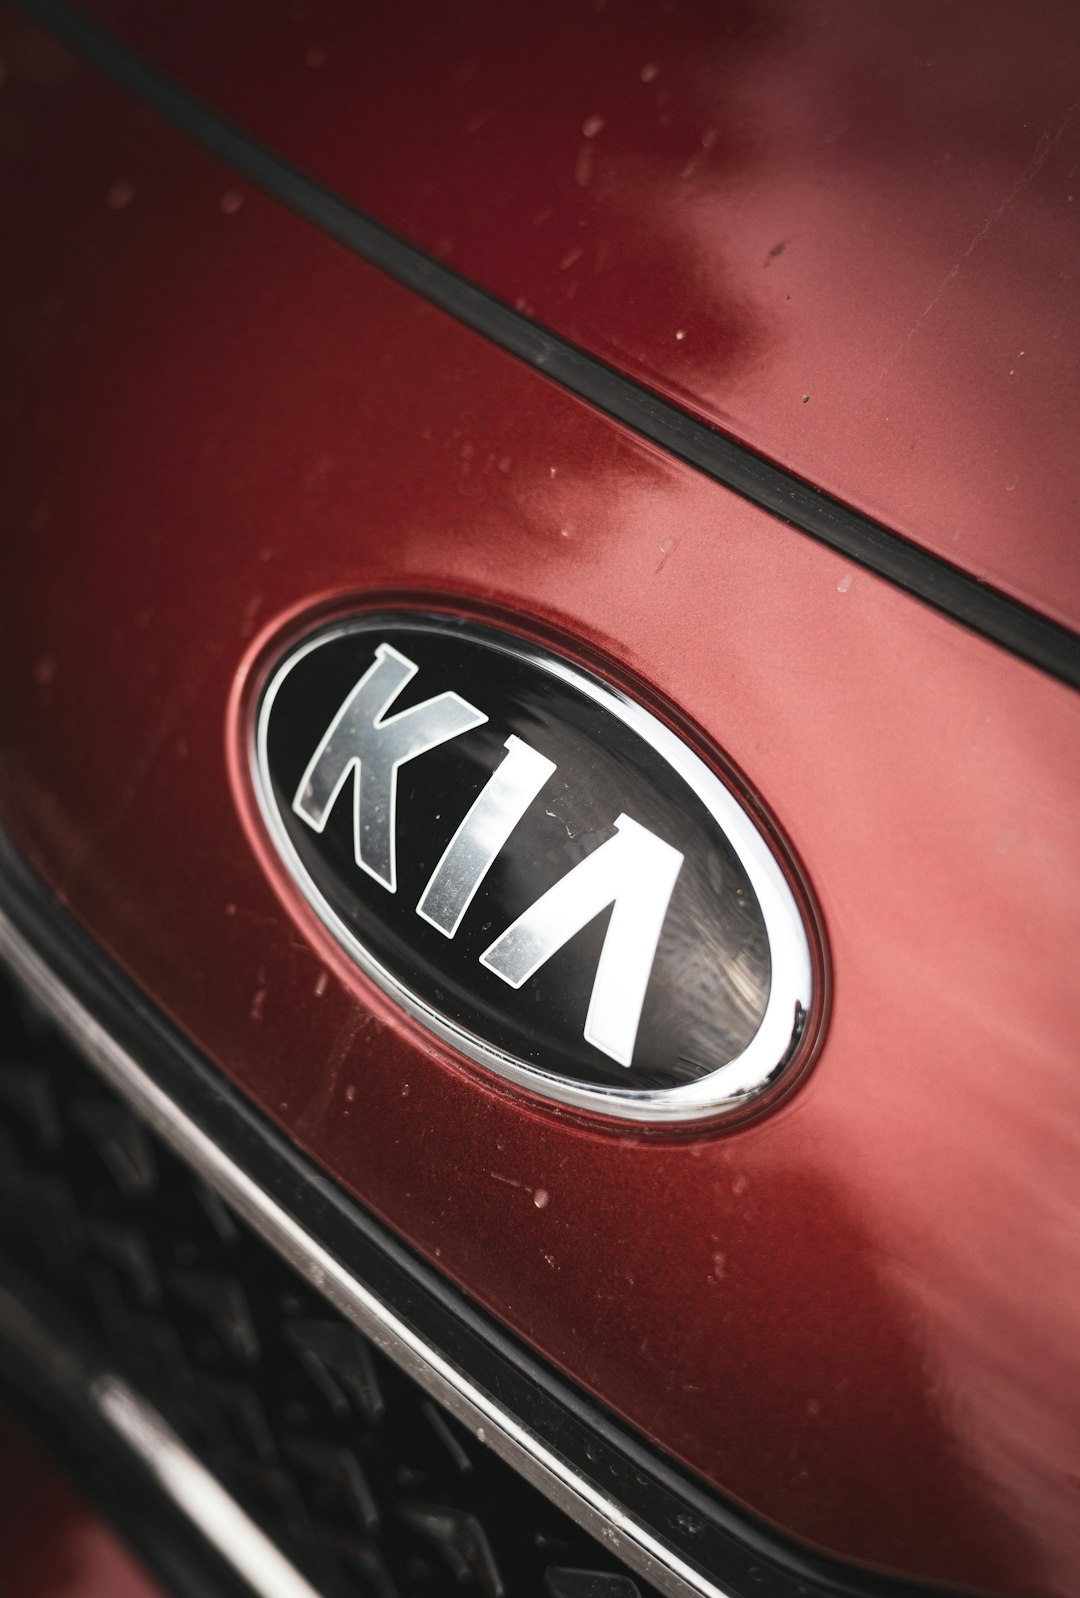 The Kia Sorento Plug-in Hybrid is an efficient and eco-friendly SUV that seamlessly combines power and sustainability.